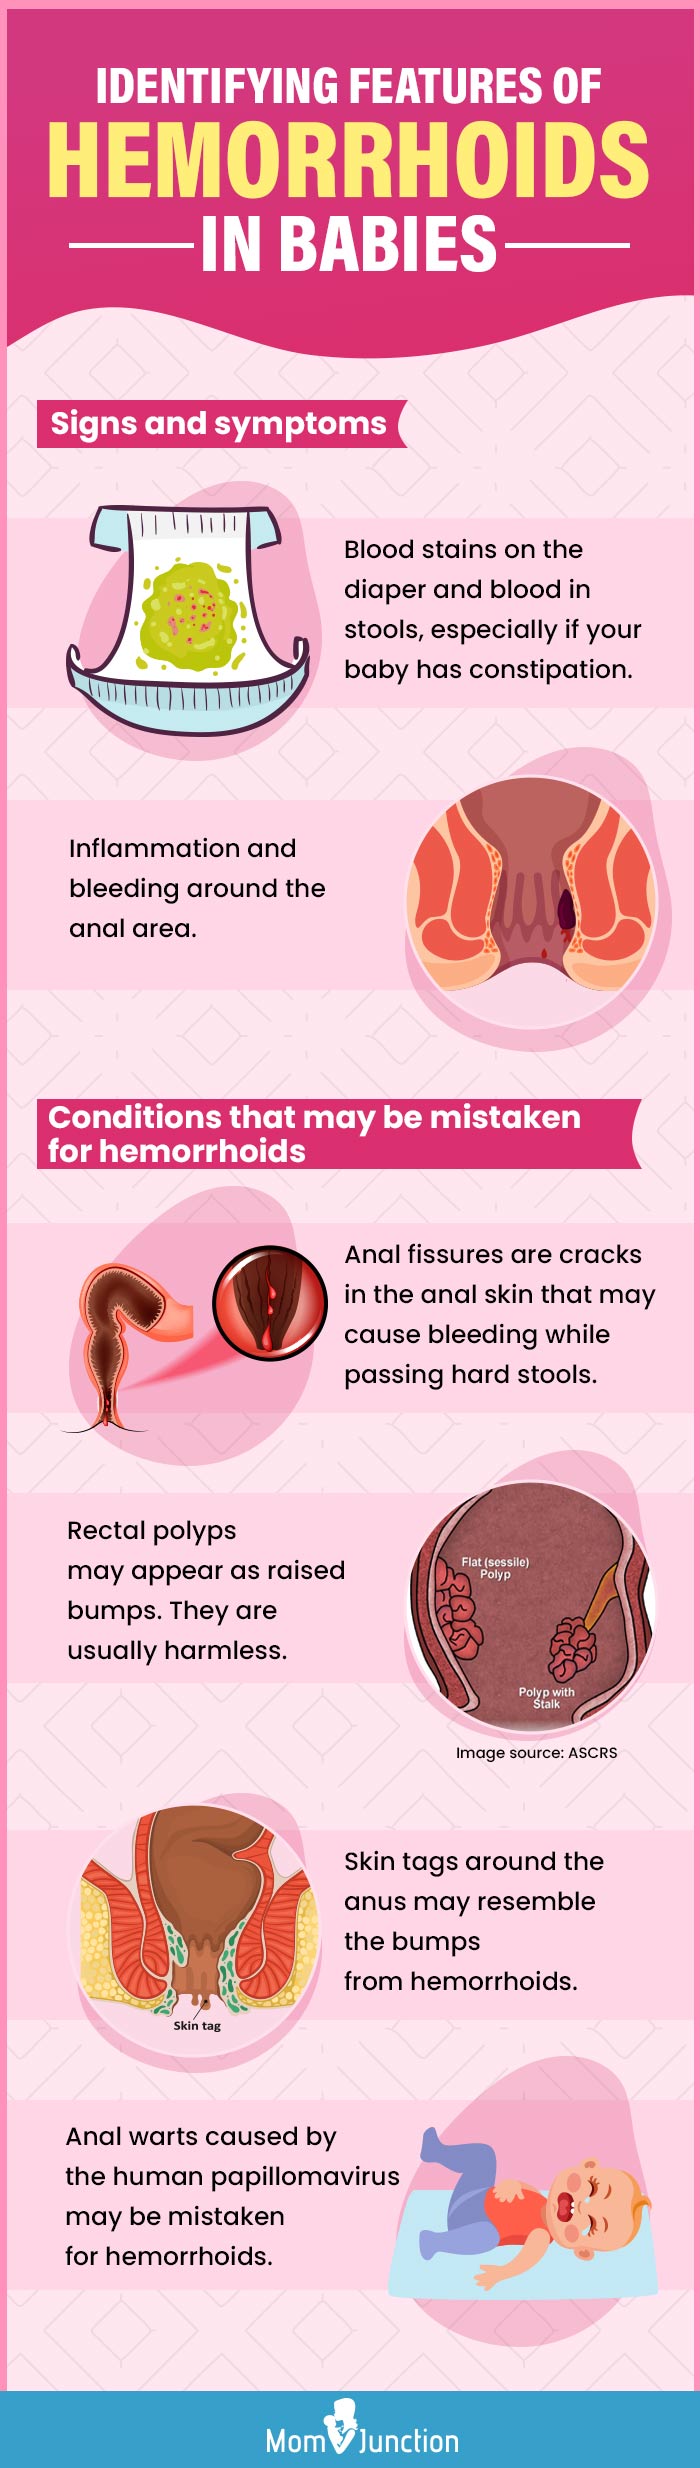 identifying features of hemorrhoids in babies (infographic)